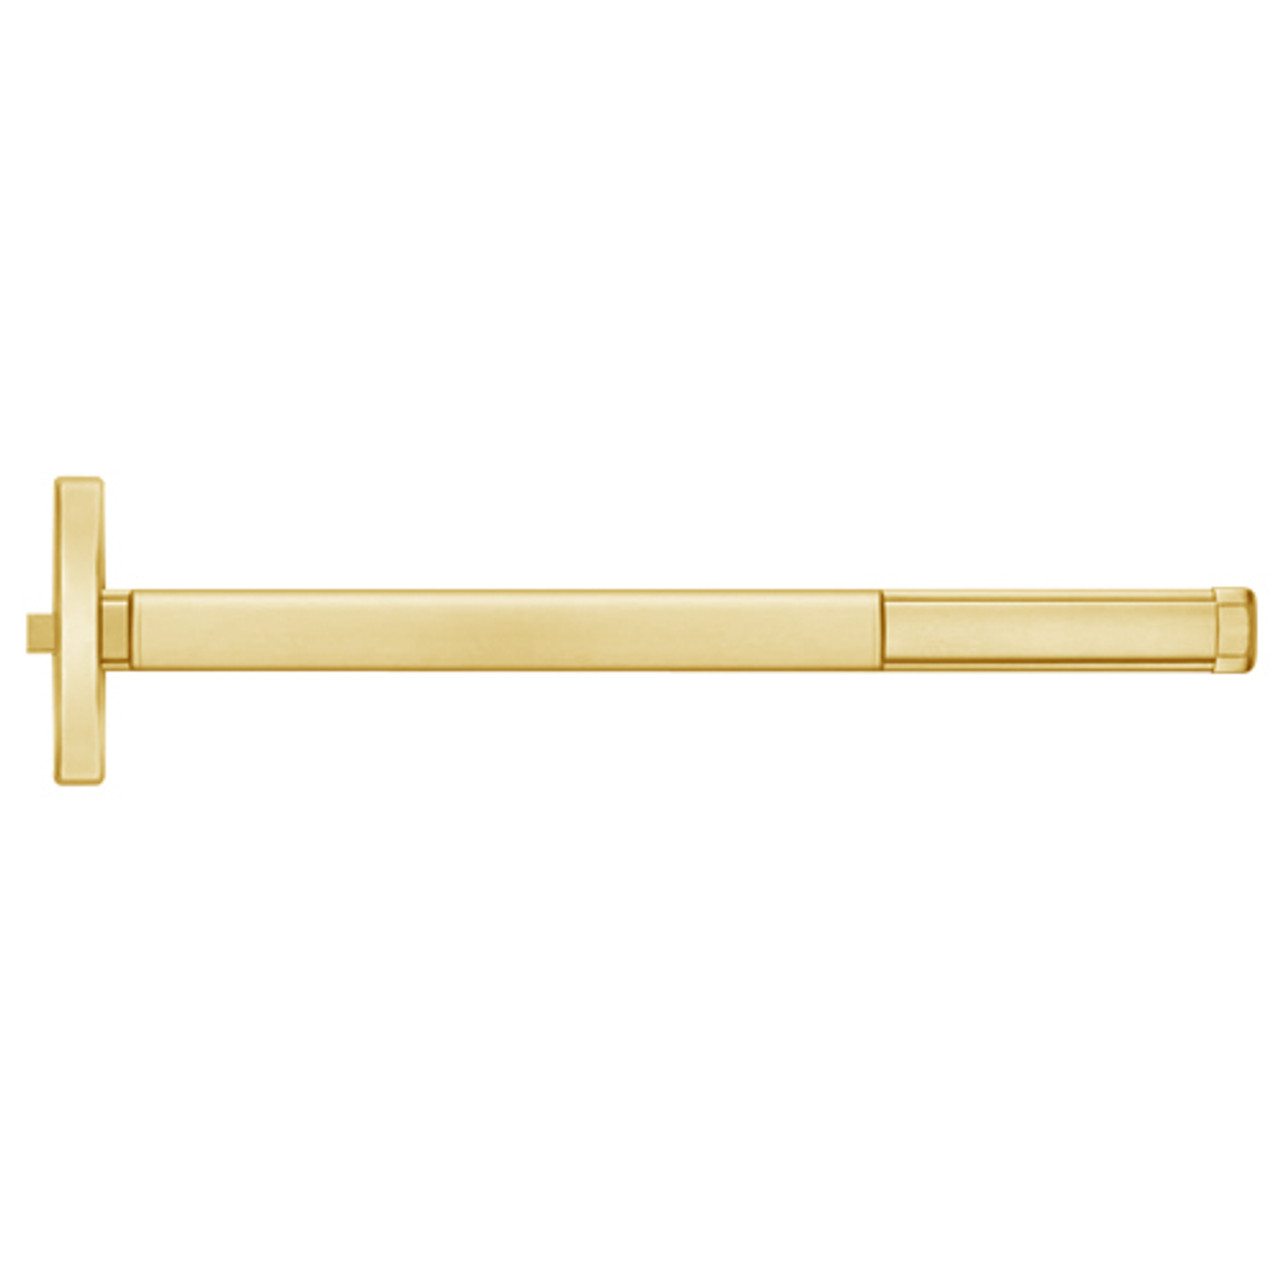 MLRFL2414-605-48 PHI 2400 Series Fire Rated Apex Rim Exit Device with Motorized Latch Retraction Prepped for Lever Always Active in Bright Brass Finish